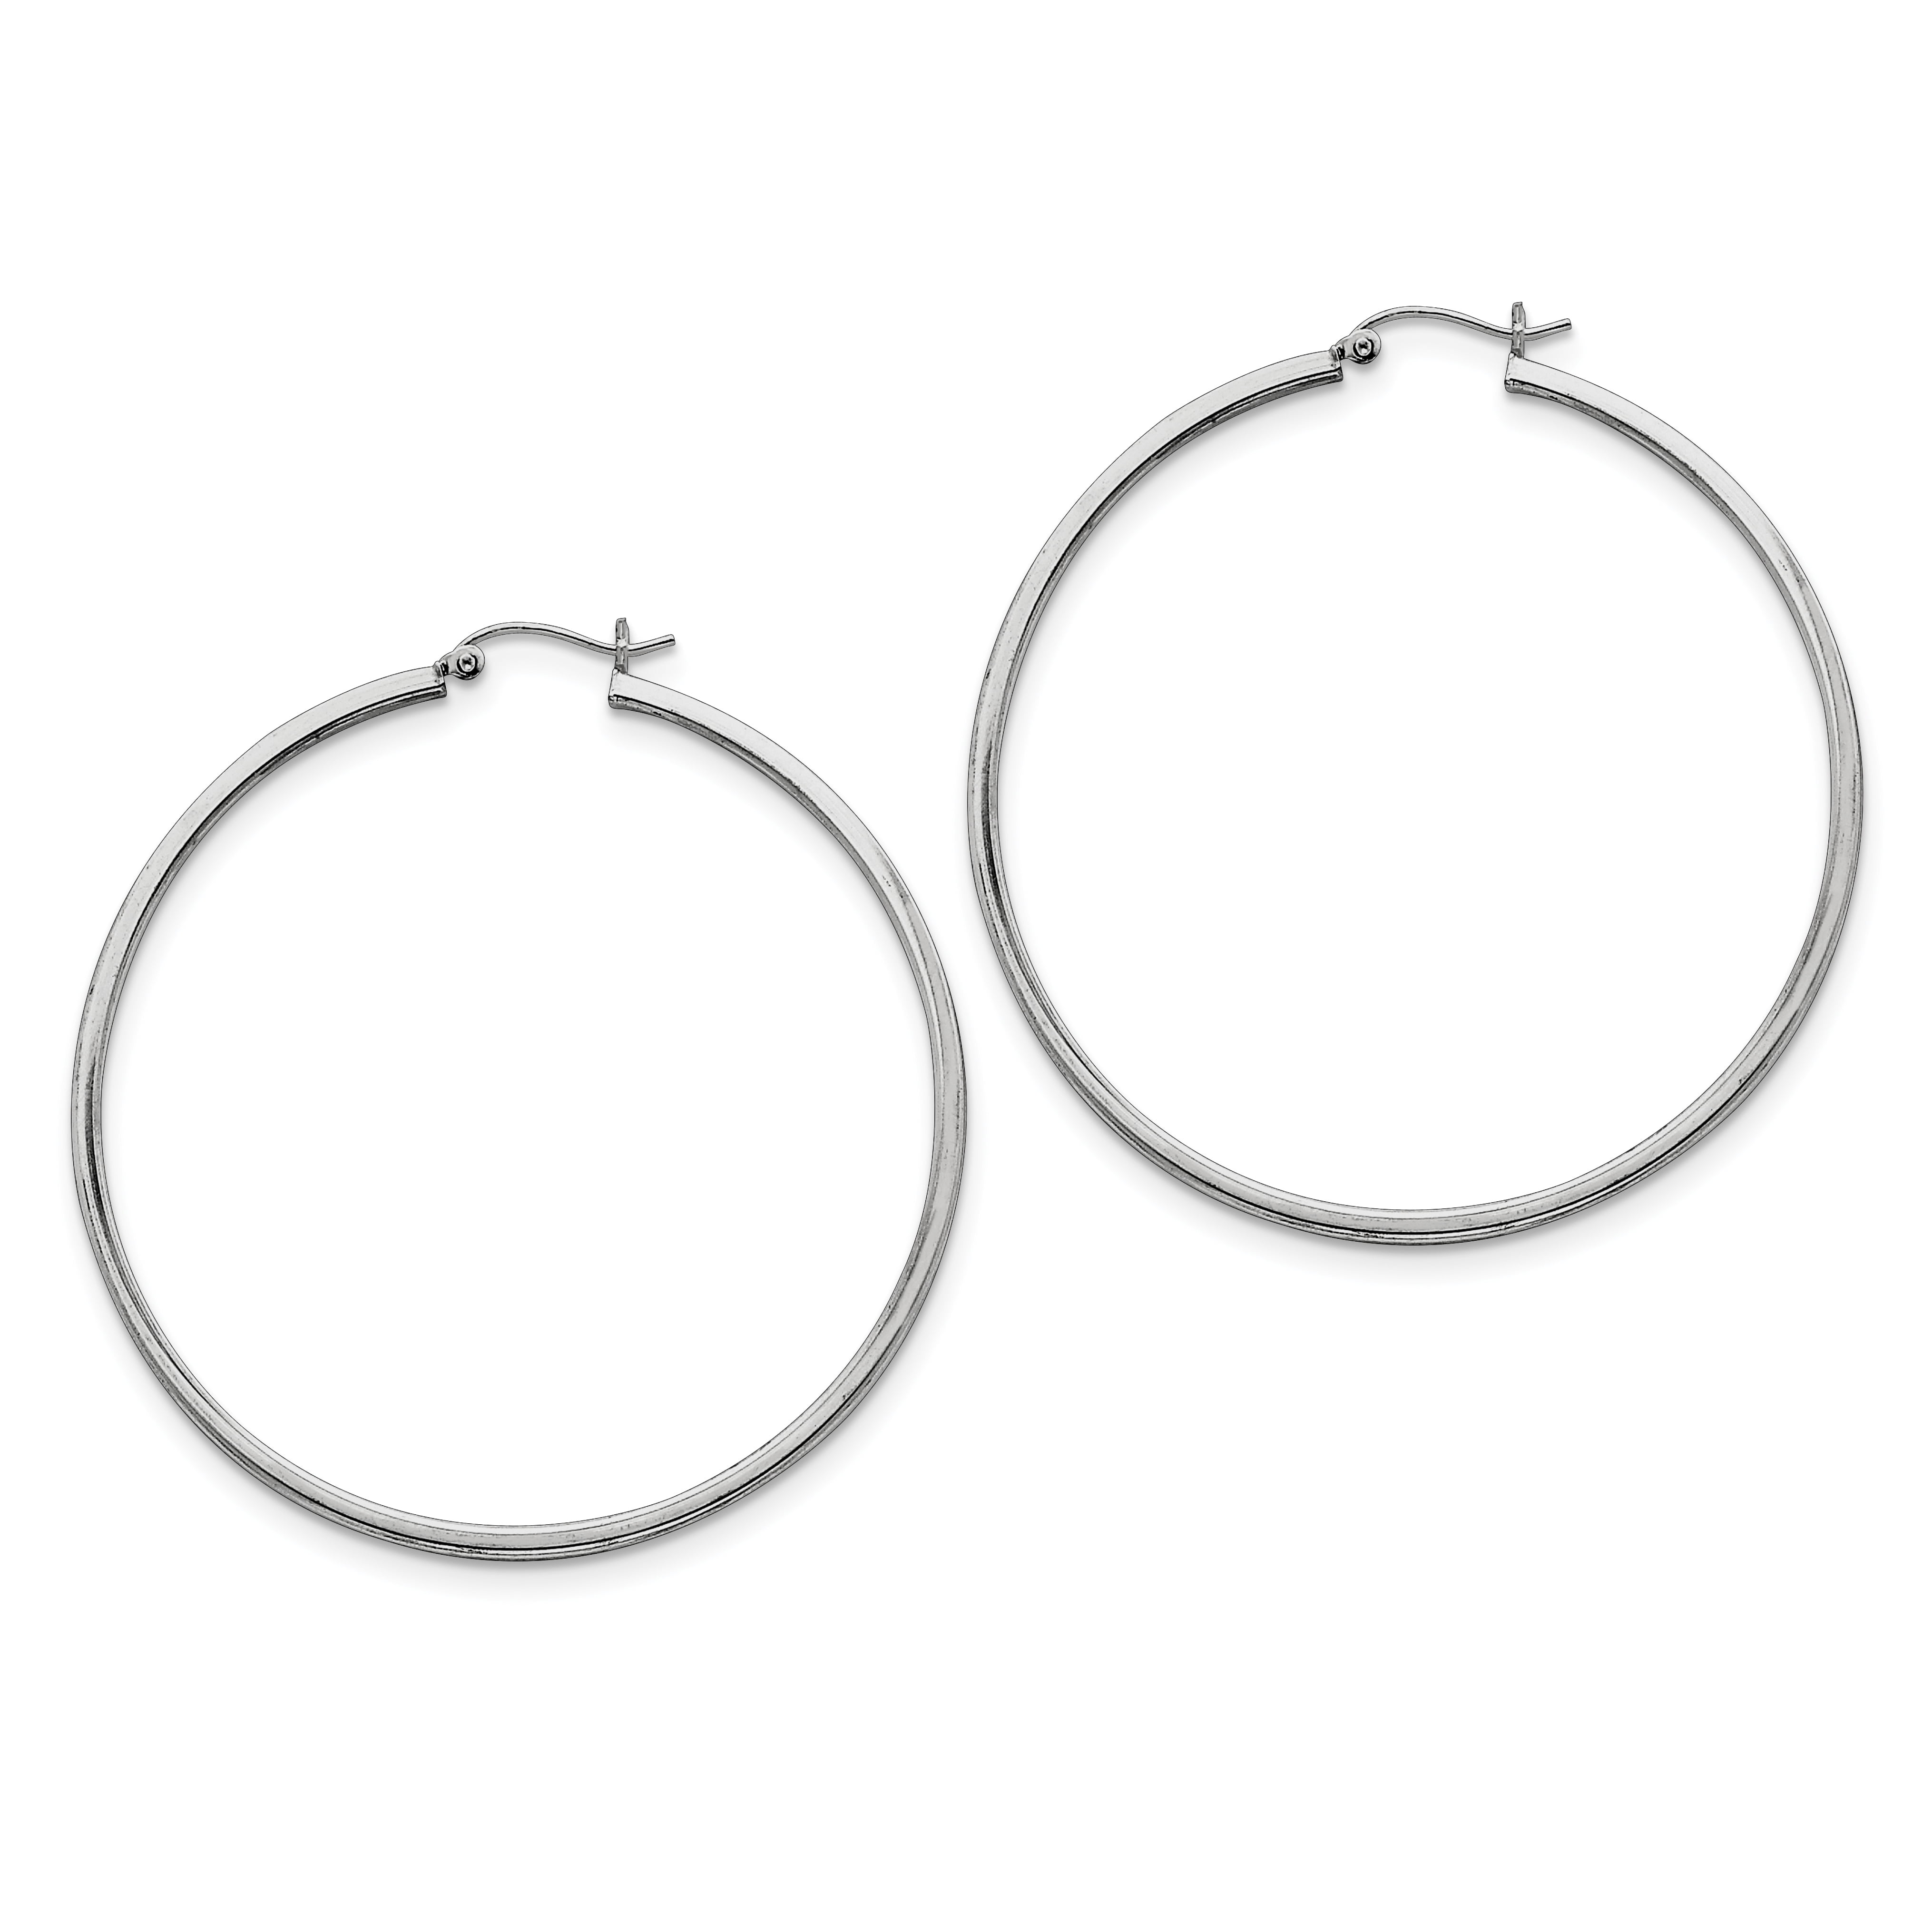 925 Sterling Silver 2x55mm Square Tube Hoop Earrings Ear Hoops Set Round Fine Jewelry For Women Gifts For Her 